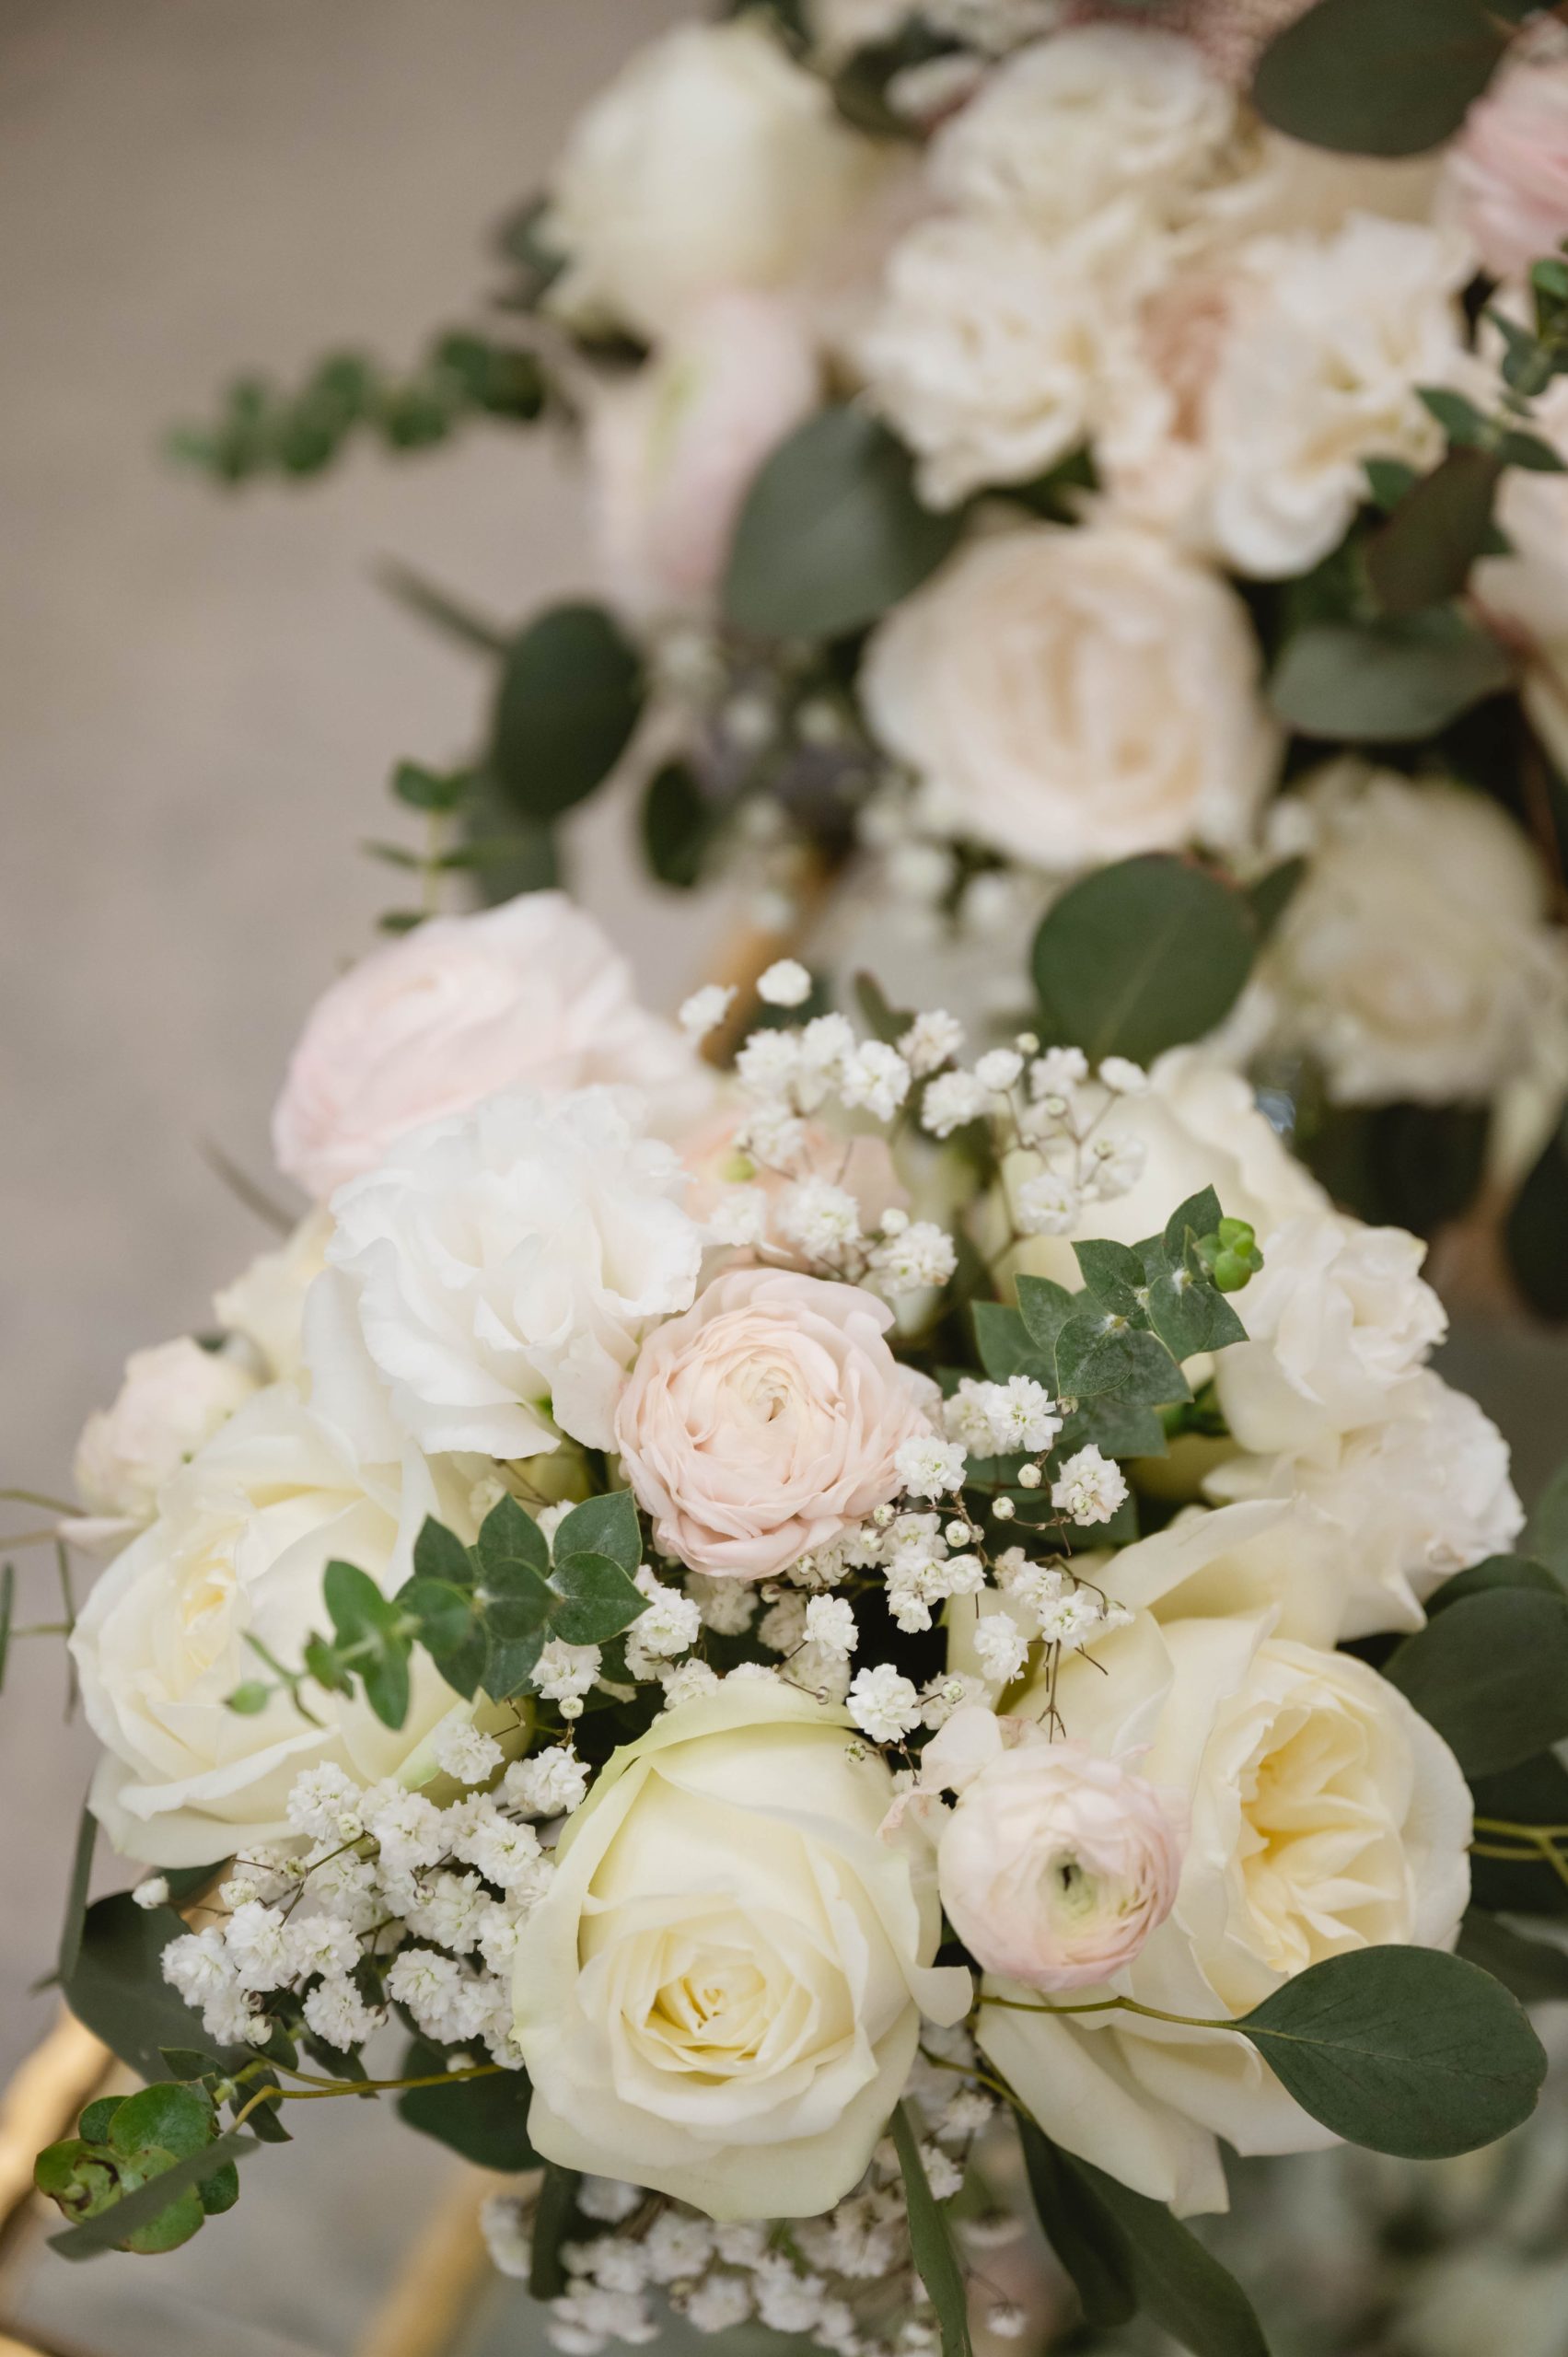 Details from this Soft Romantic + Minimalistic Wedding at Viansa Winery in Sonoma Jen Vazquez Photography